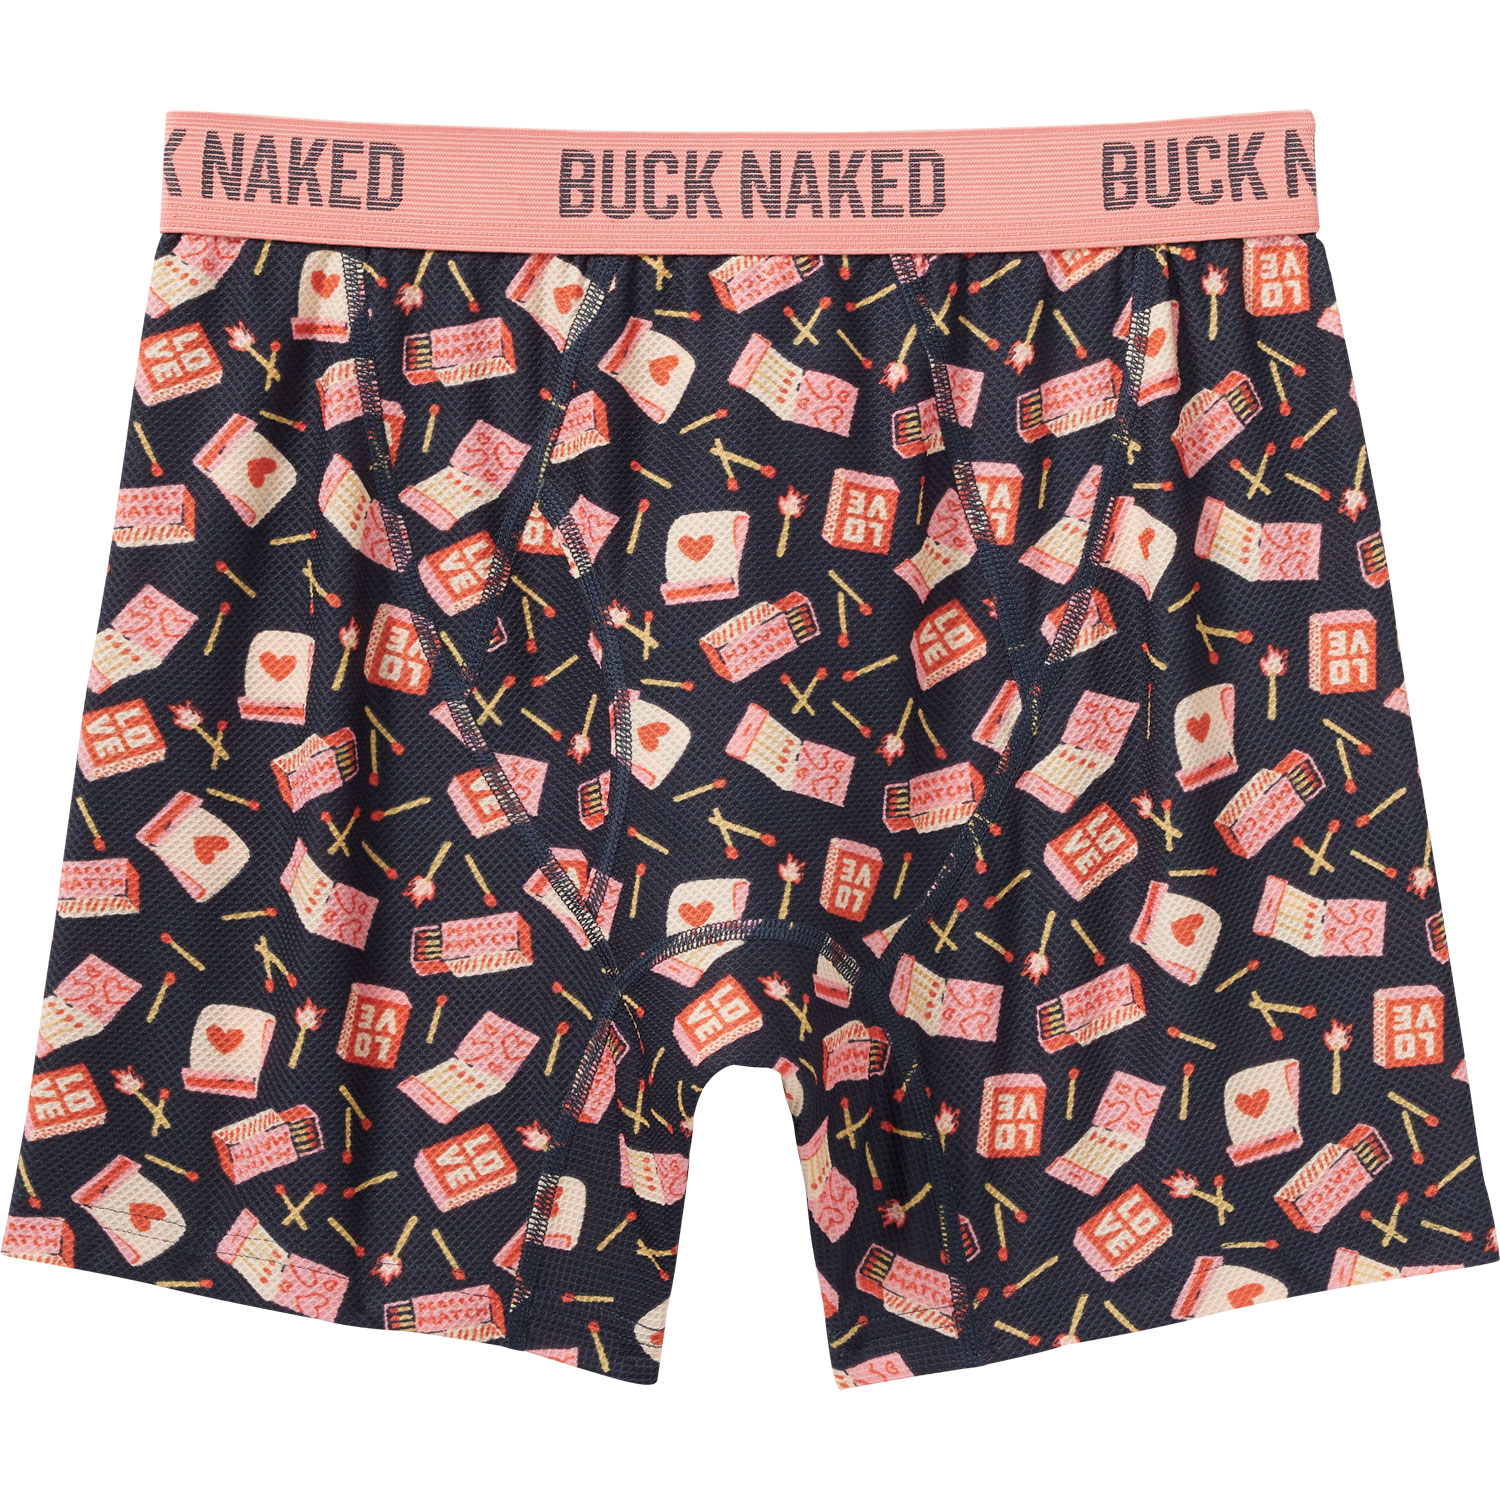 Men's Buck Naked Pattern Boxer Briefs | Duluth Trading Company